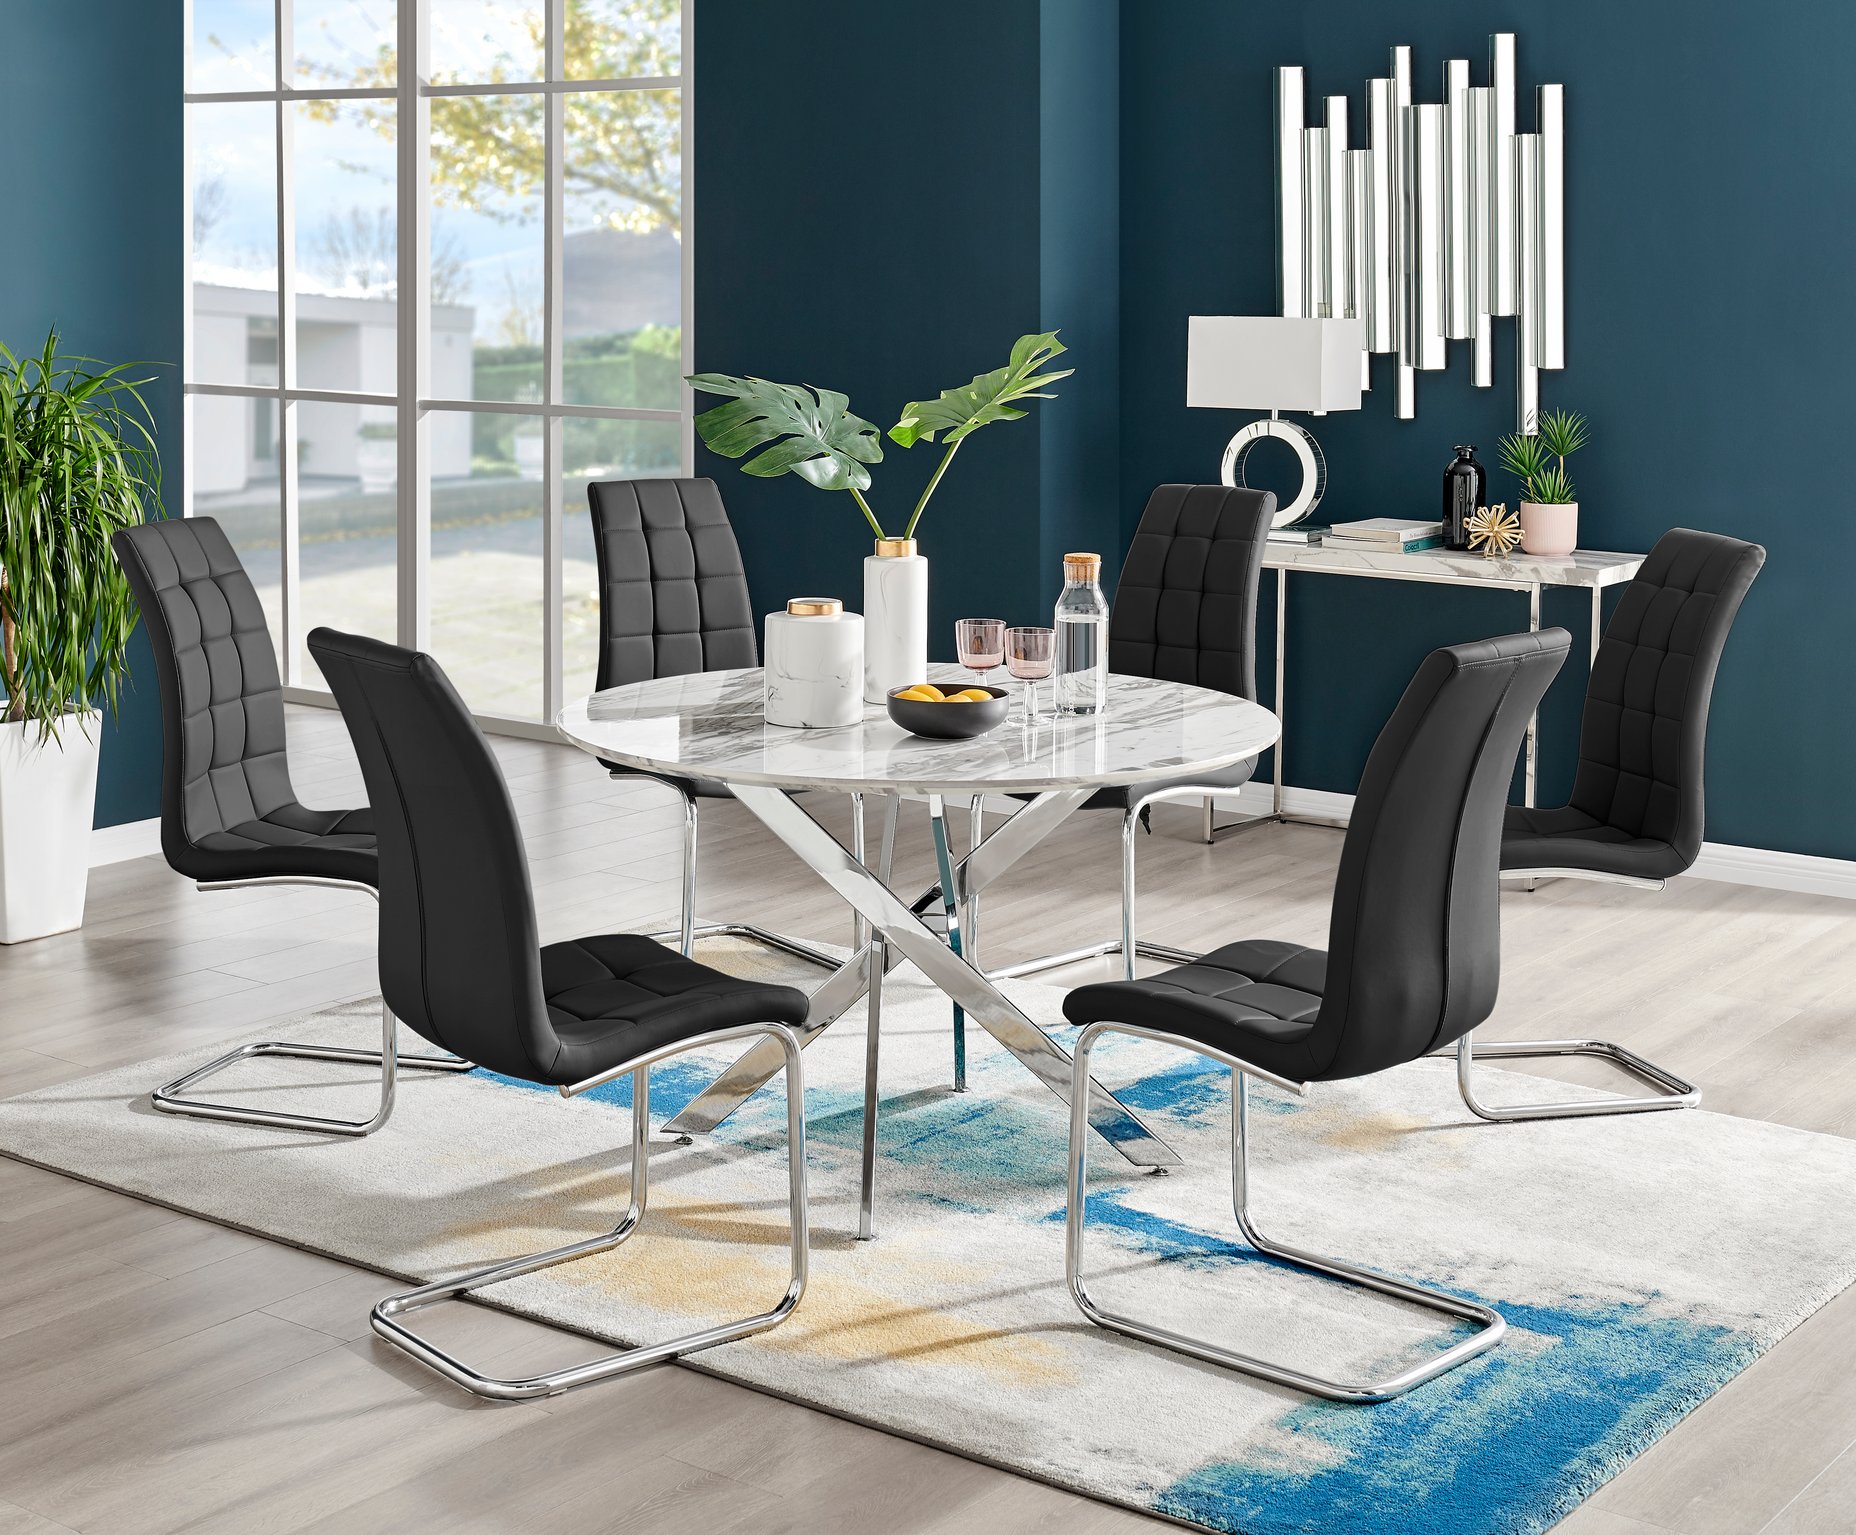 Novara White Marble Round Dining Table 120cm and 6 Murano Chairs Furniture Set